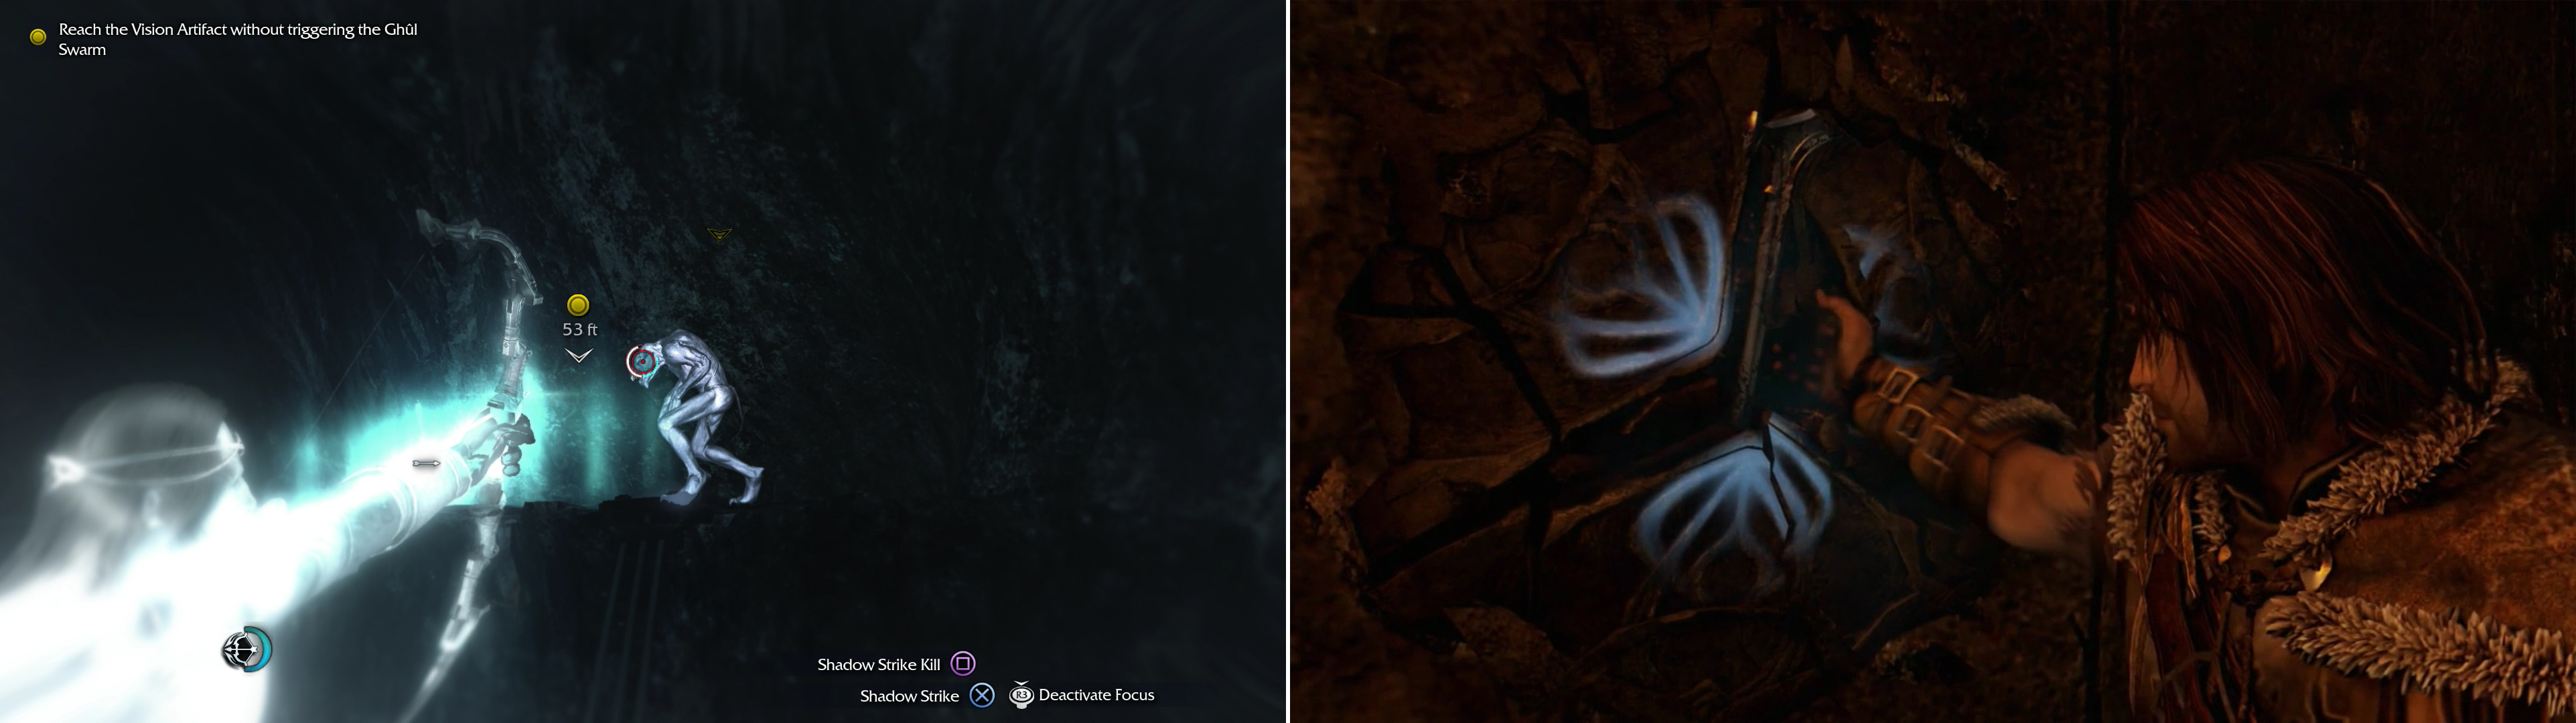 Keep to high ground wherever possible and follow the trail through the cave, avoiding the Ghuls. You should only need to kill one Ghul near the end of your path (left). Grab Celebrimbor’s hammer to witness another vision (right).